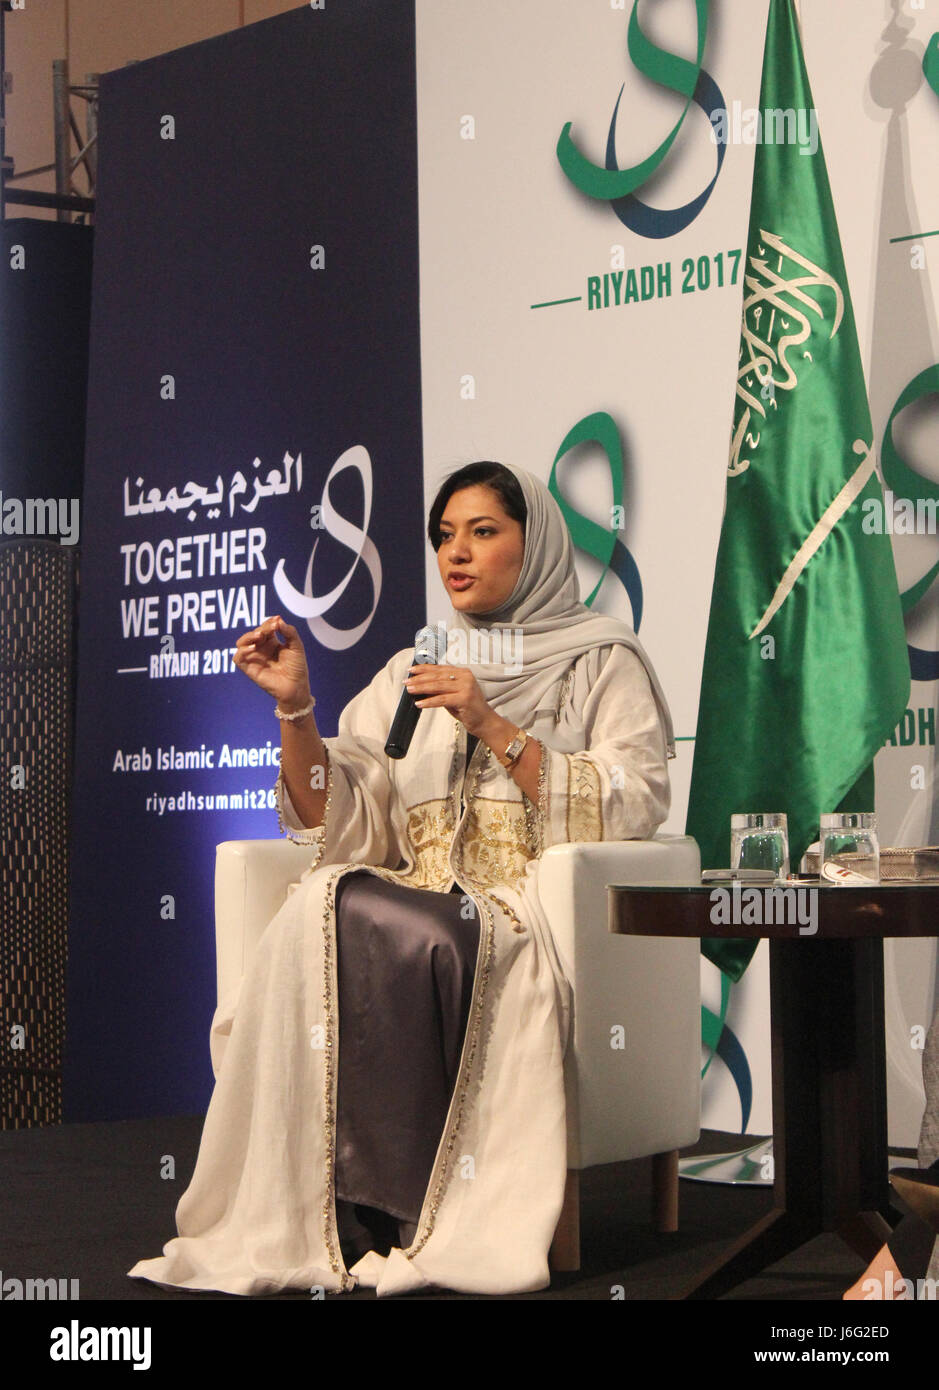 Riyadh, Saudi Arabia. 21st May, 2017. Saudi Arabian Princess Reema bint Bander Al Saud, Vice President for Women's Affairs of the General Sports Authority in Saudi Arabia, speaking on the sidelines of a two-day visit by US President Trump in Riyadh, Saudi Arabia, 21 May 2017. Princess Reema bint Bander Al Saud hosted a roundtable with 15 Saudi women and Ivanka Trump. Photo: Nehal El-Sherif/dpa/Alamy Live News Stock Photo